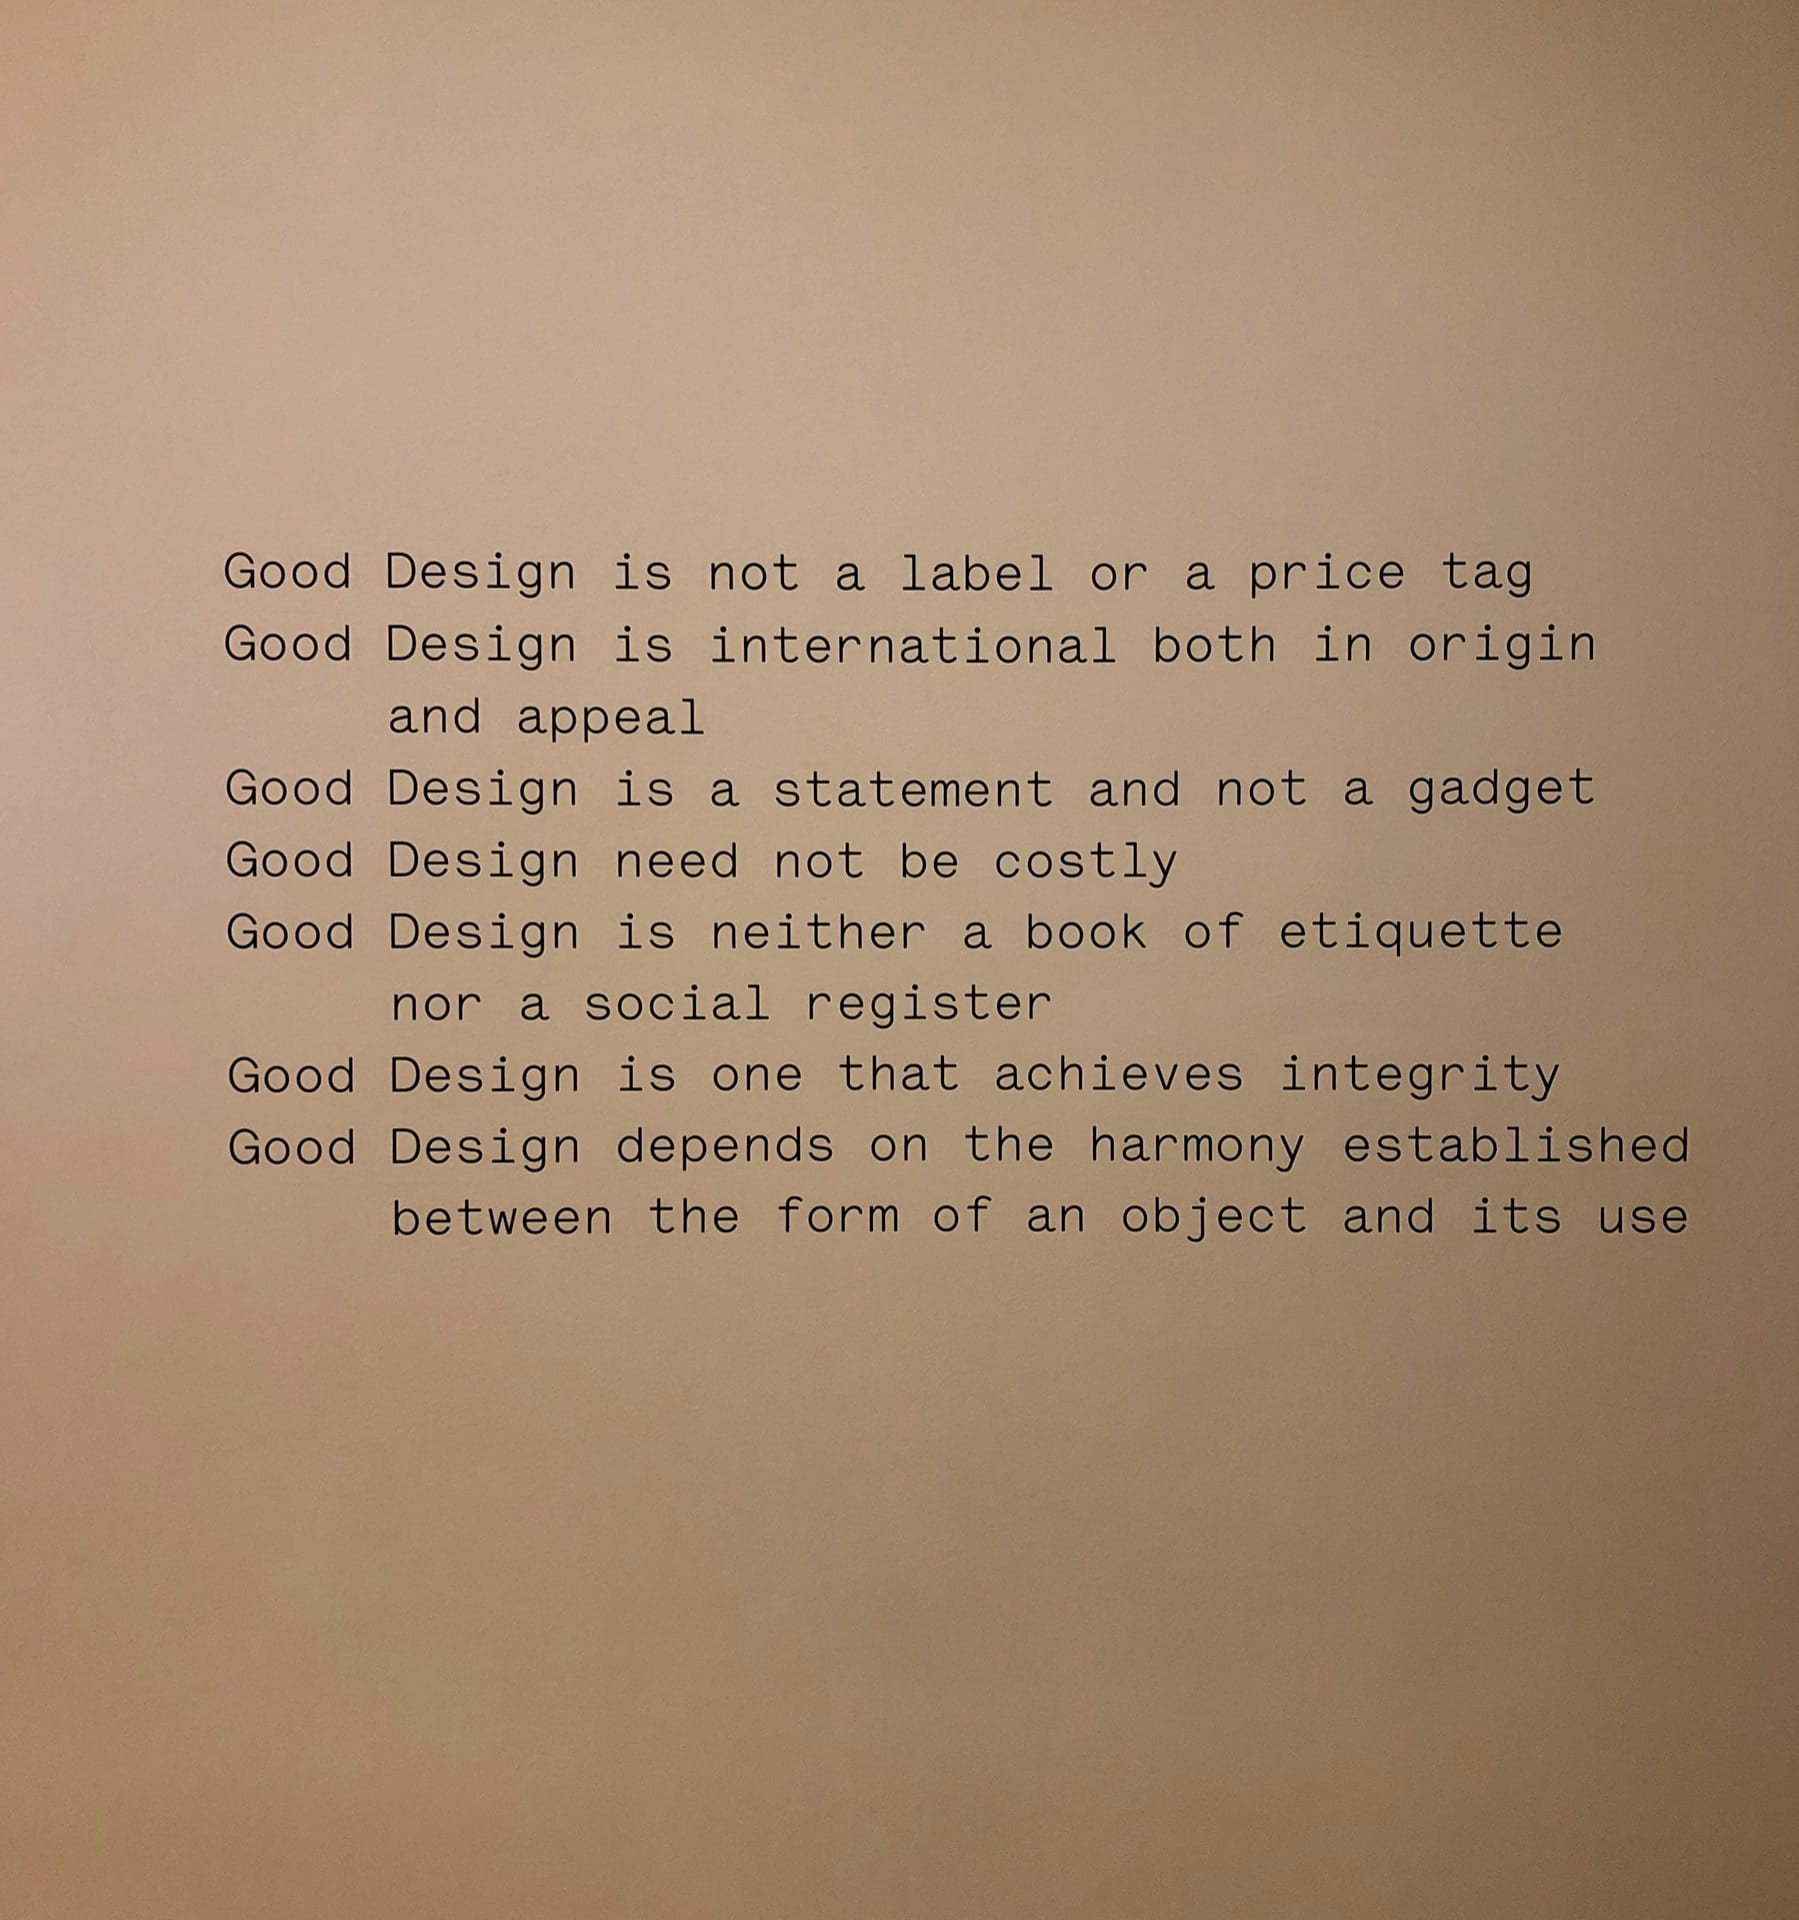 The Value of Good Design